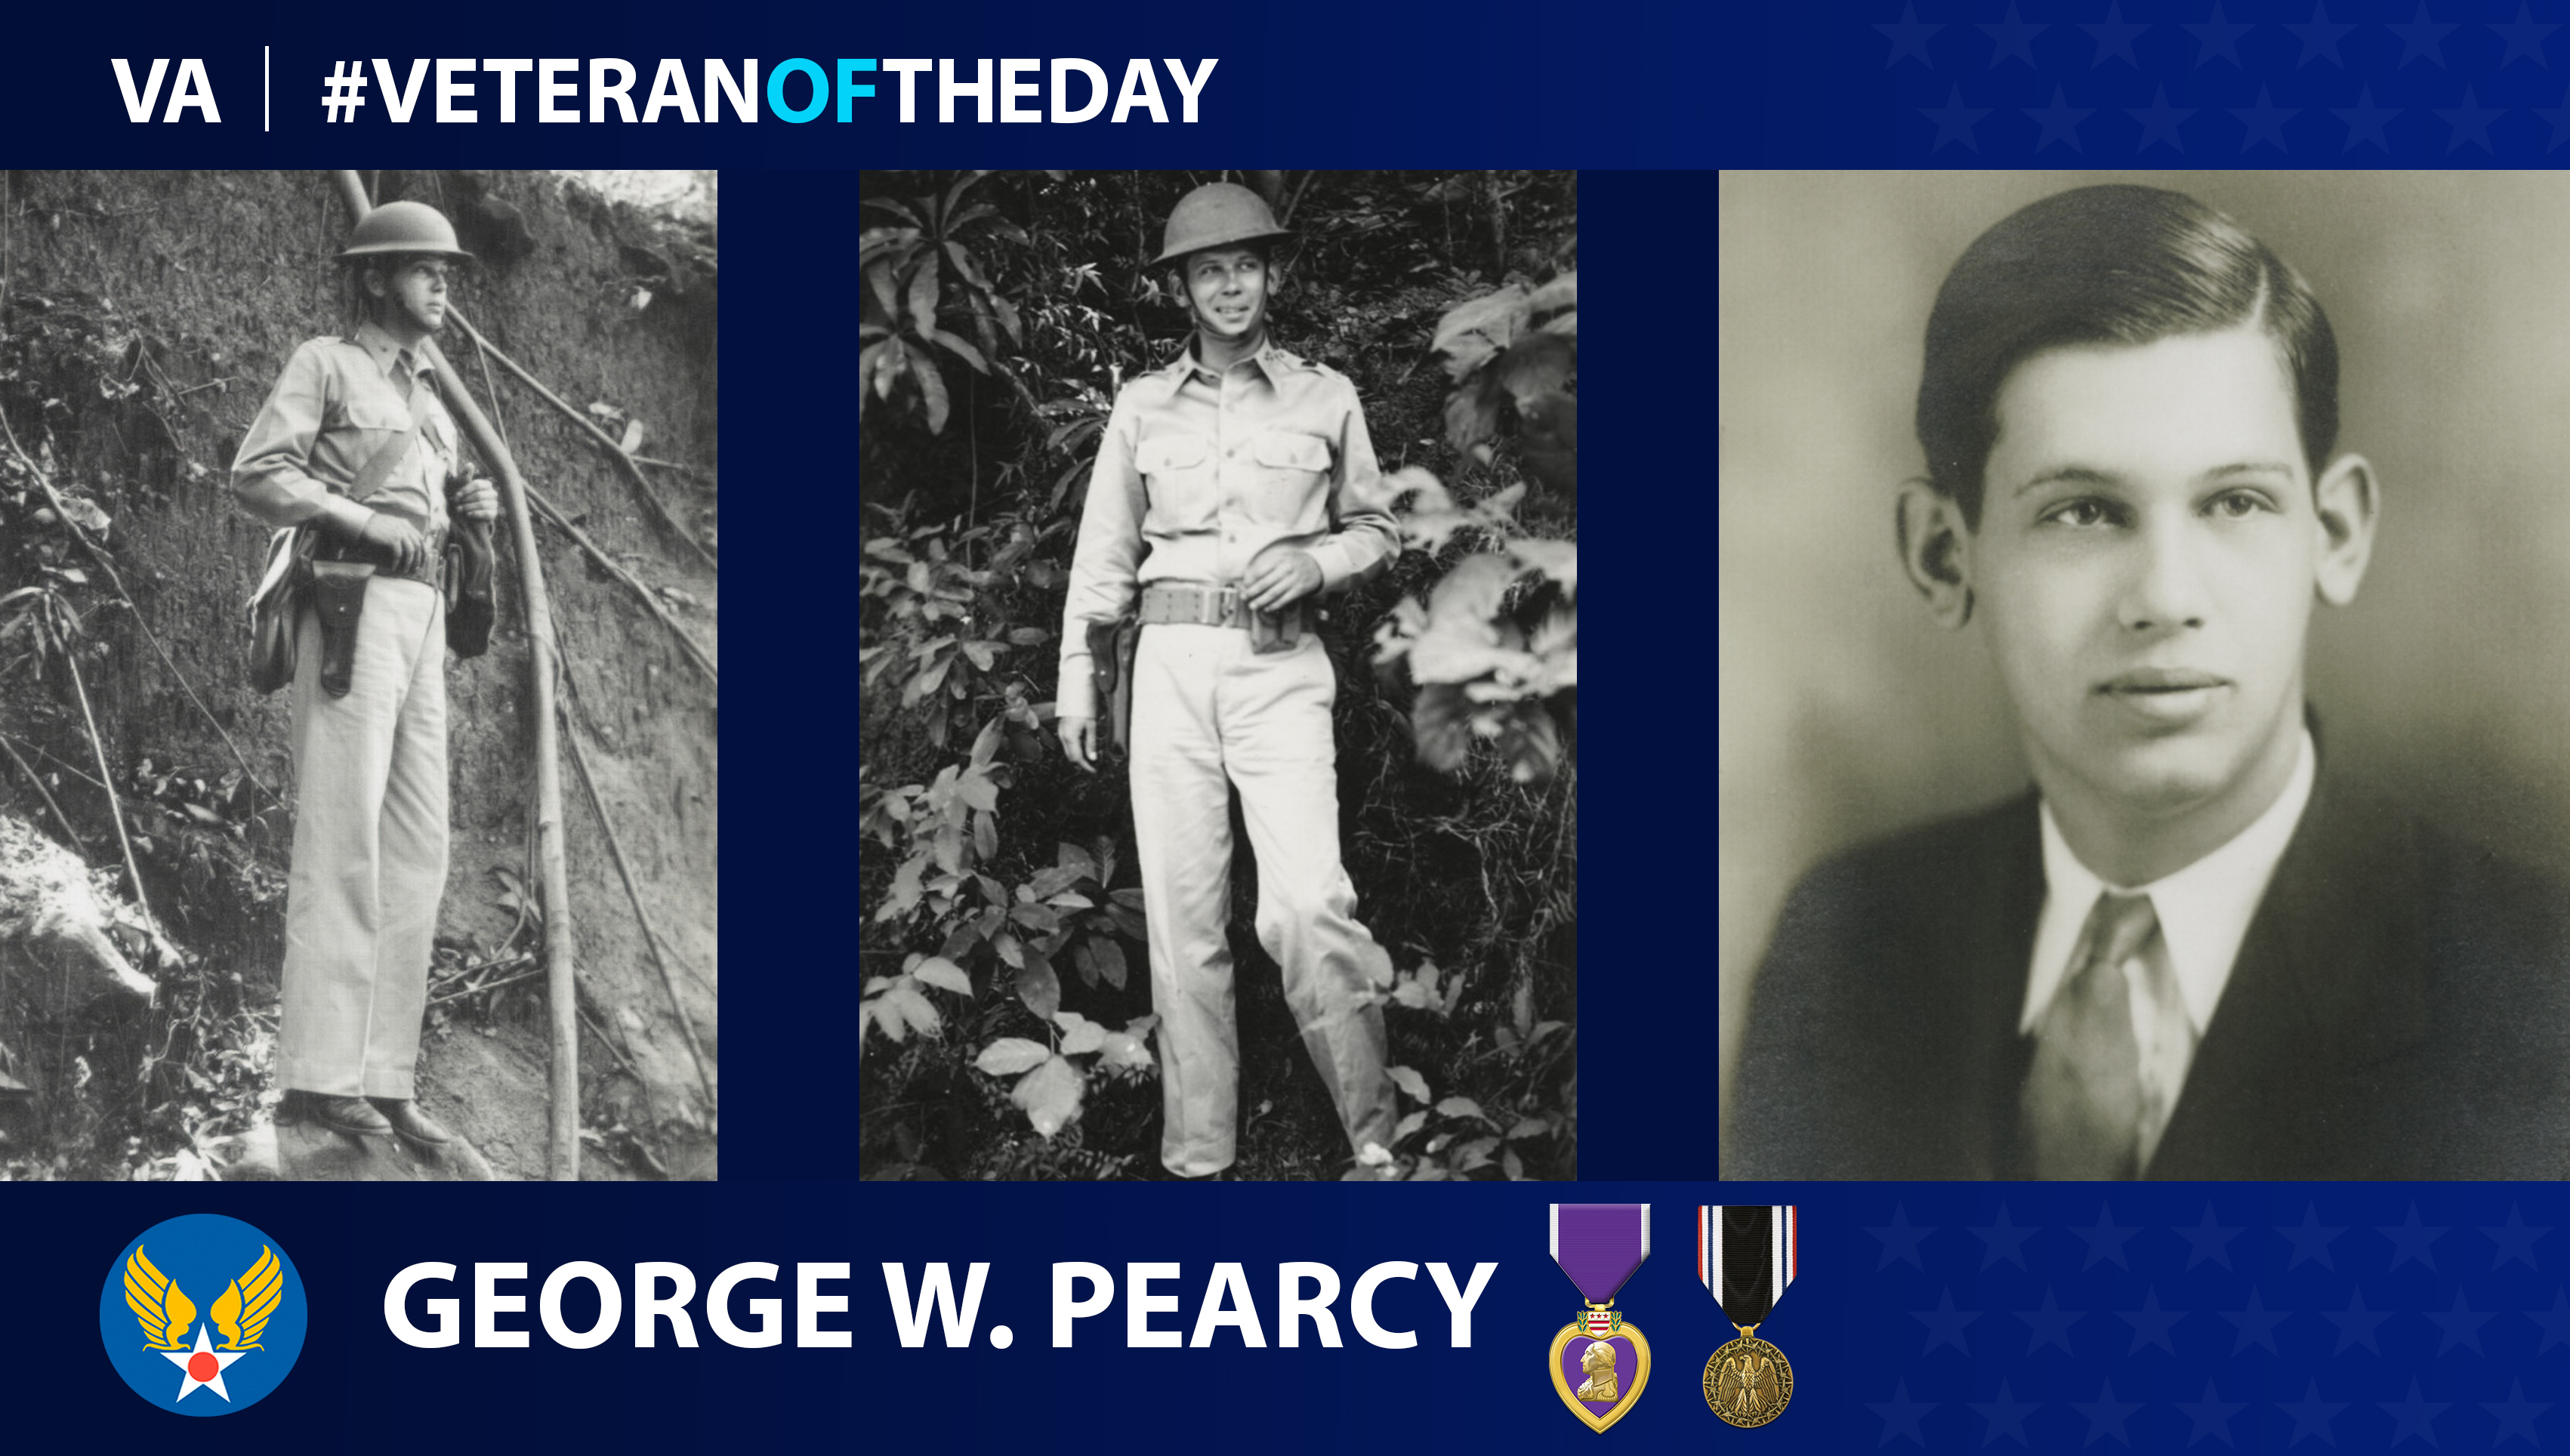 Army Air Forces Veteran George Washington Pearcy is today’s Veteran Of The Day.